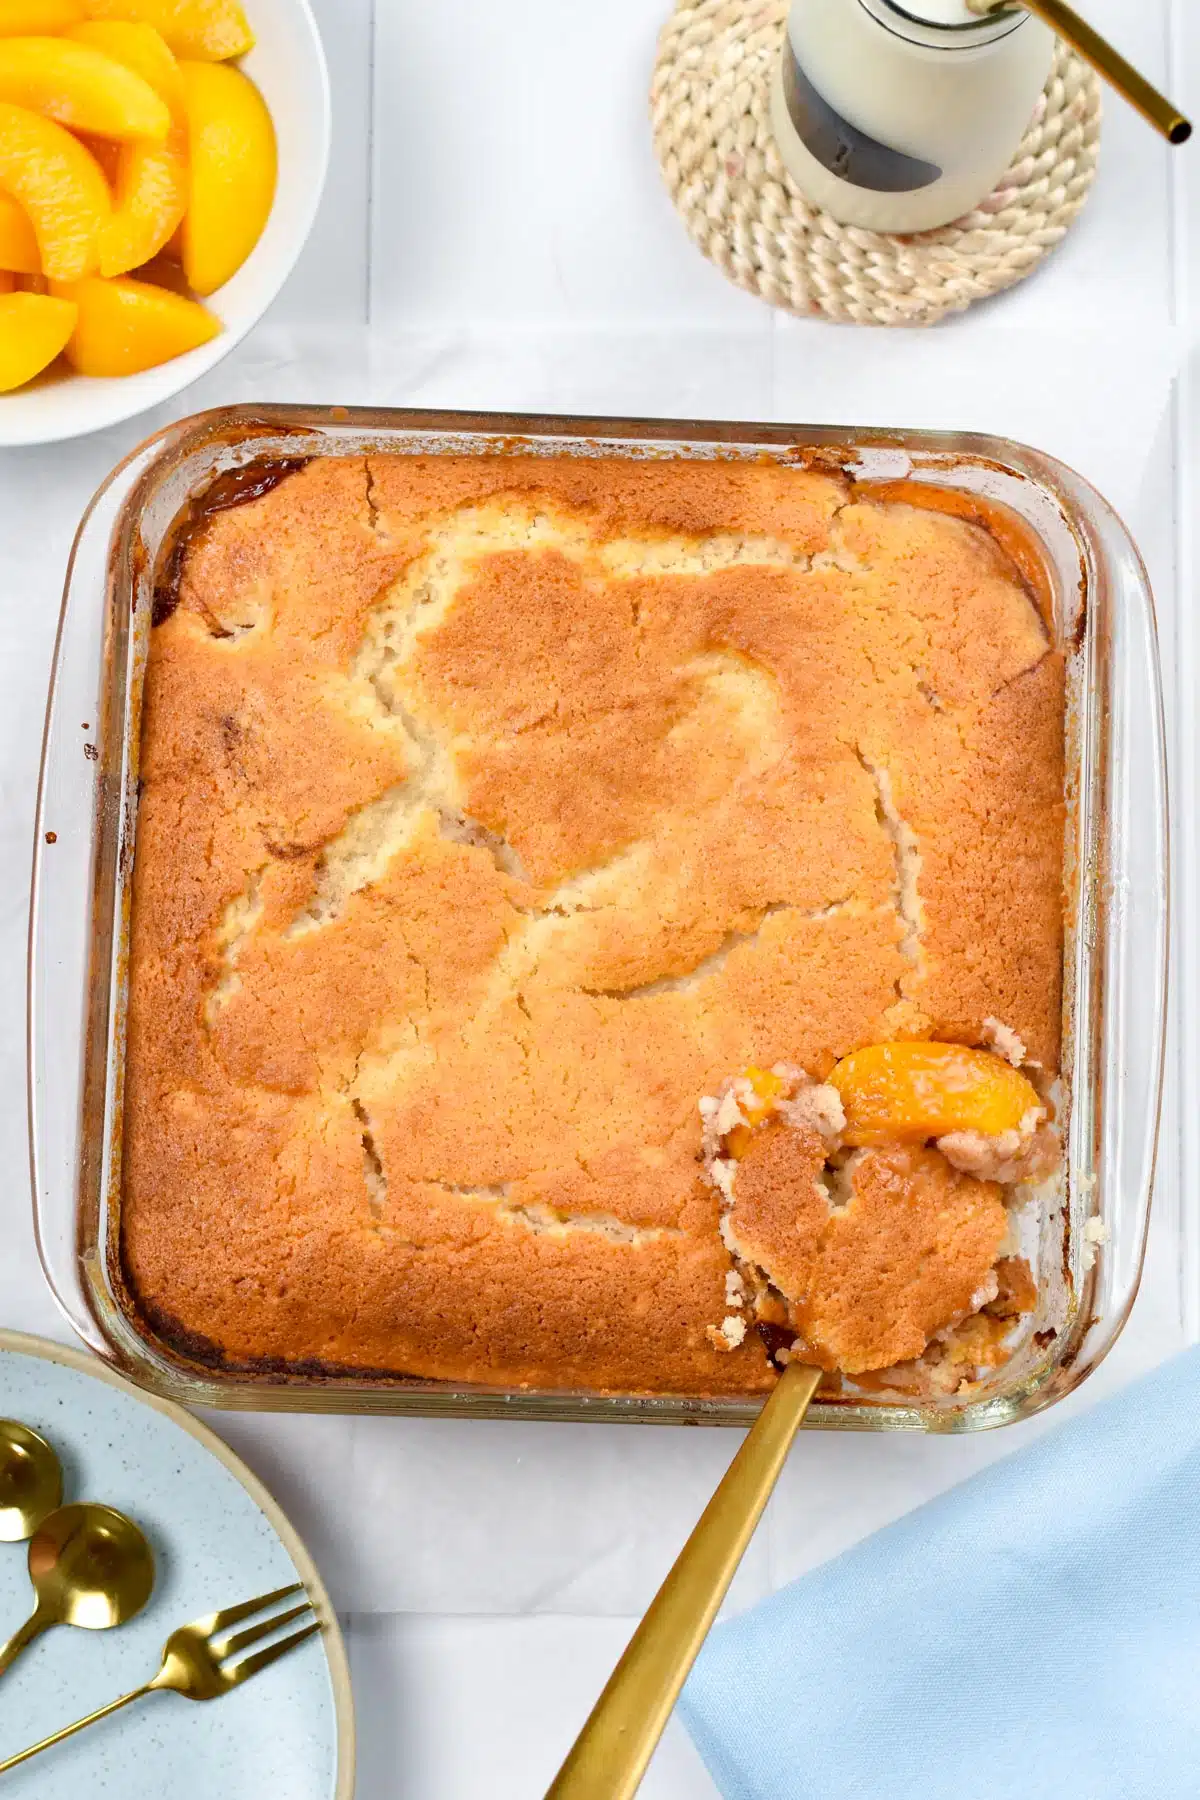 This Peach Cobbler with cake mix is the easiest dessert you will ever make. Plus, you don't need eggs or fancy ingredients to make this easy cobbler recipe, and barely 10 minutes to put together.This Peach Cobbler with cake mix is the easiest dessert you will ever make. Plus, you don't need eggs or fancy ingredients to make this easy cobbler recipe, and barely 10 minutes to put together.